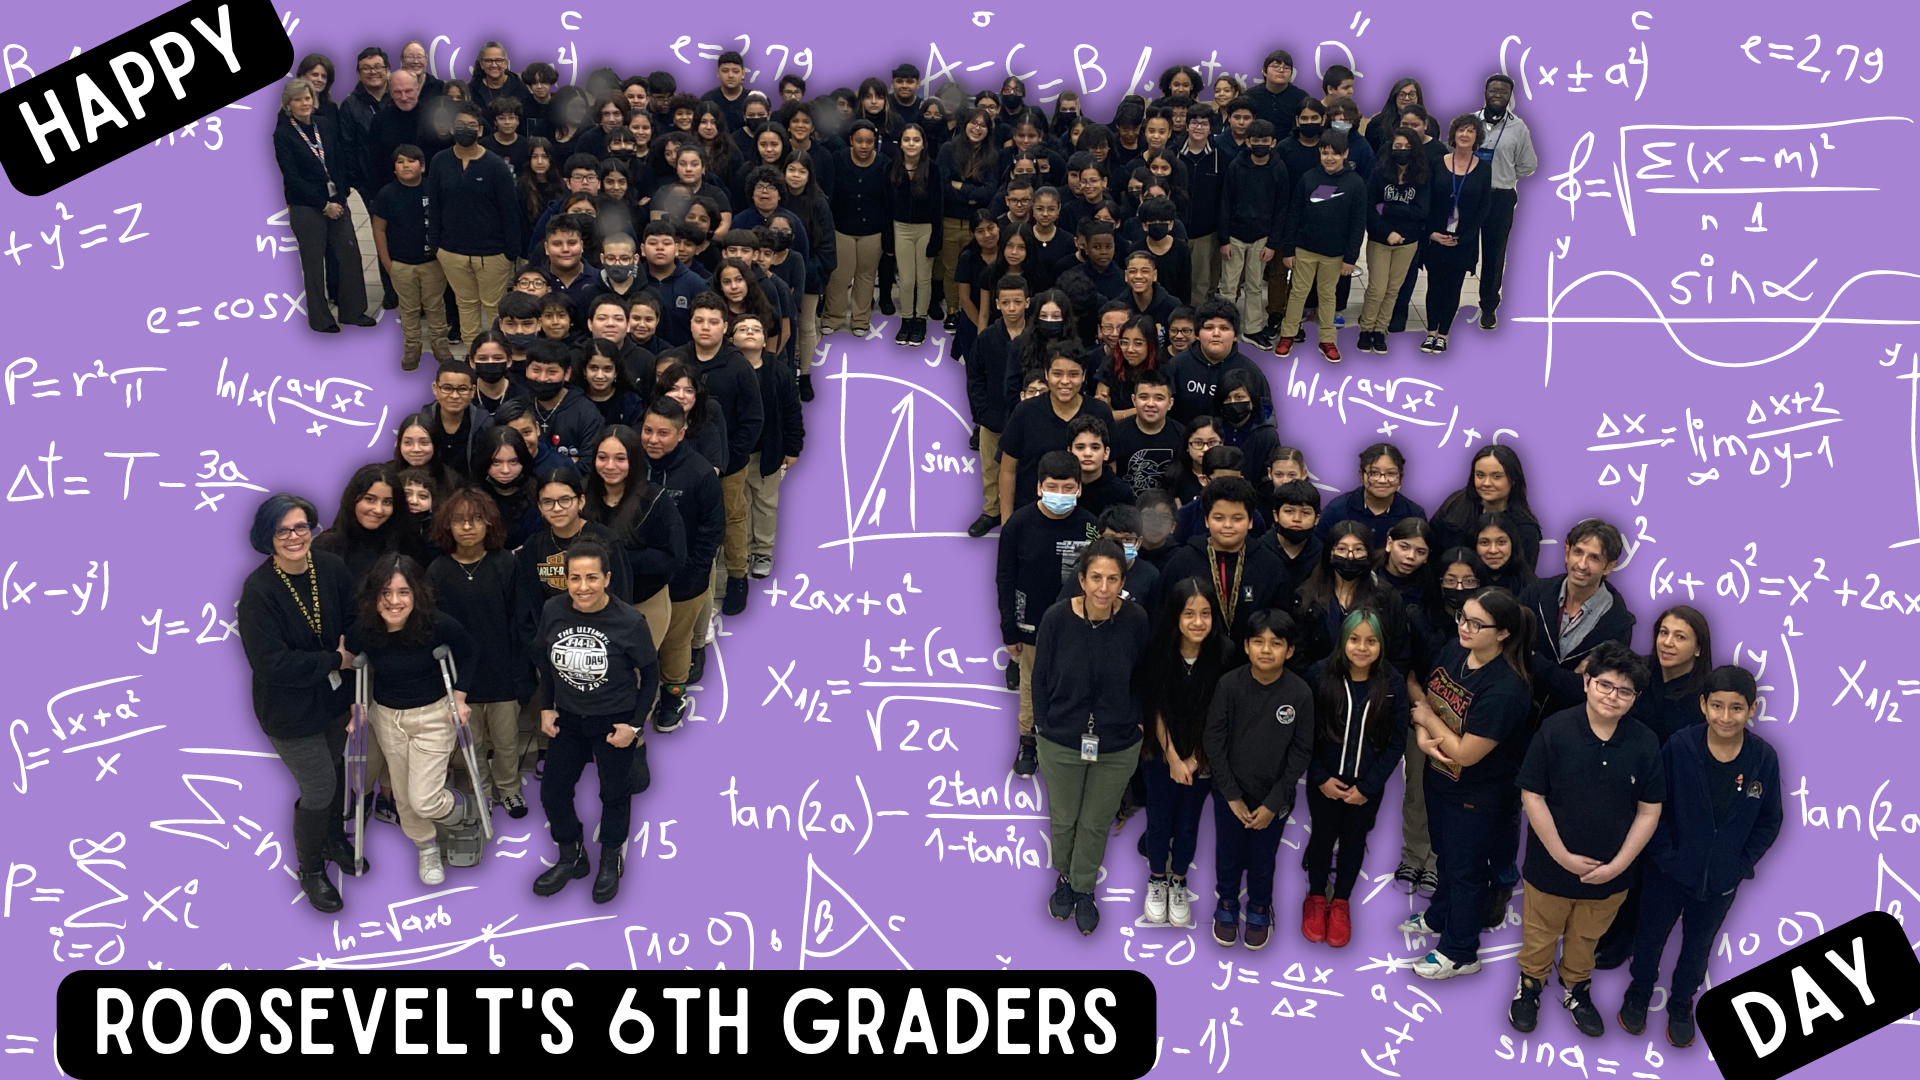 Happy Pi Day at the Roosevelt School